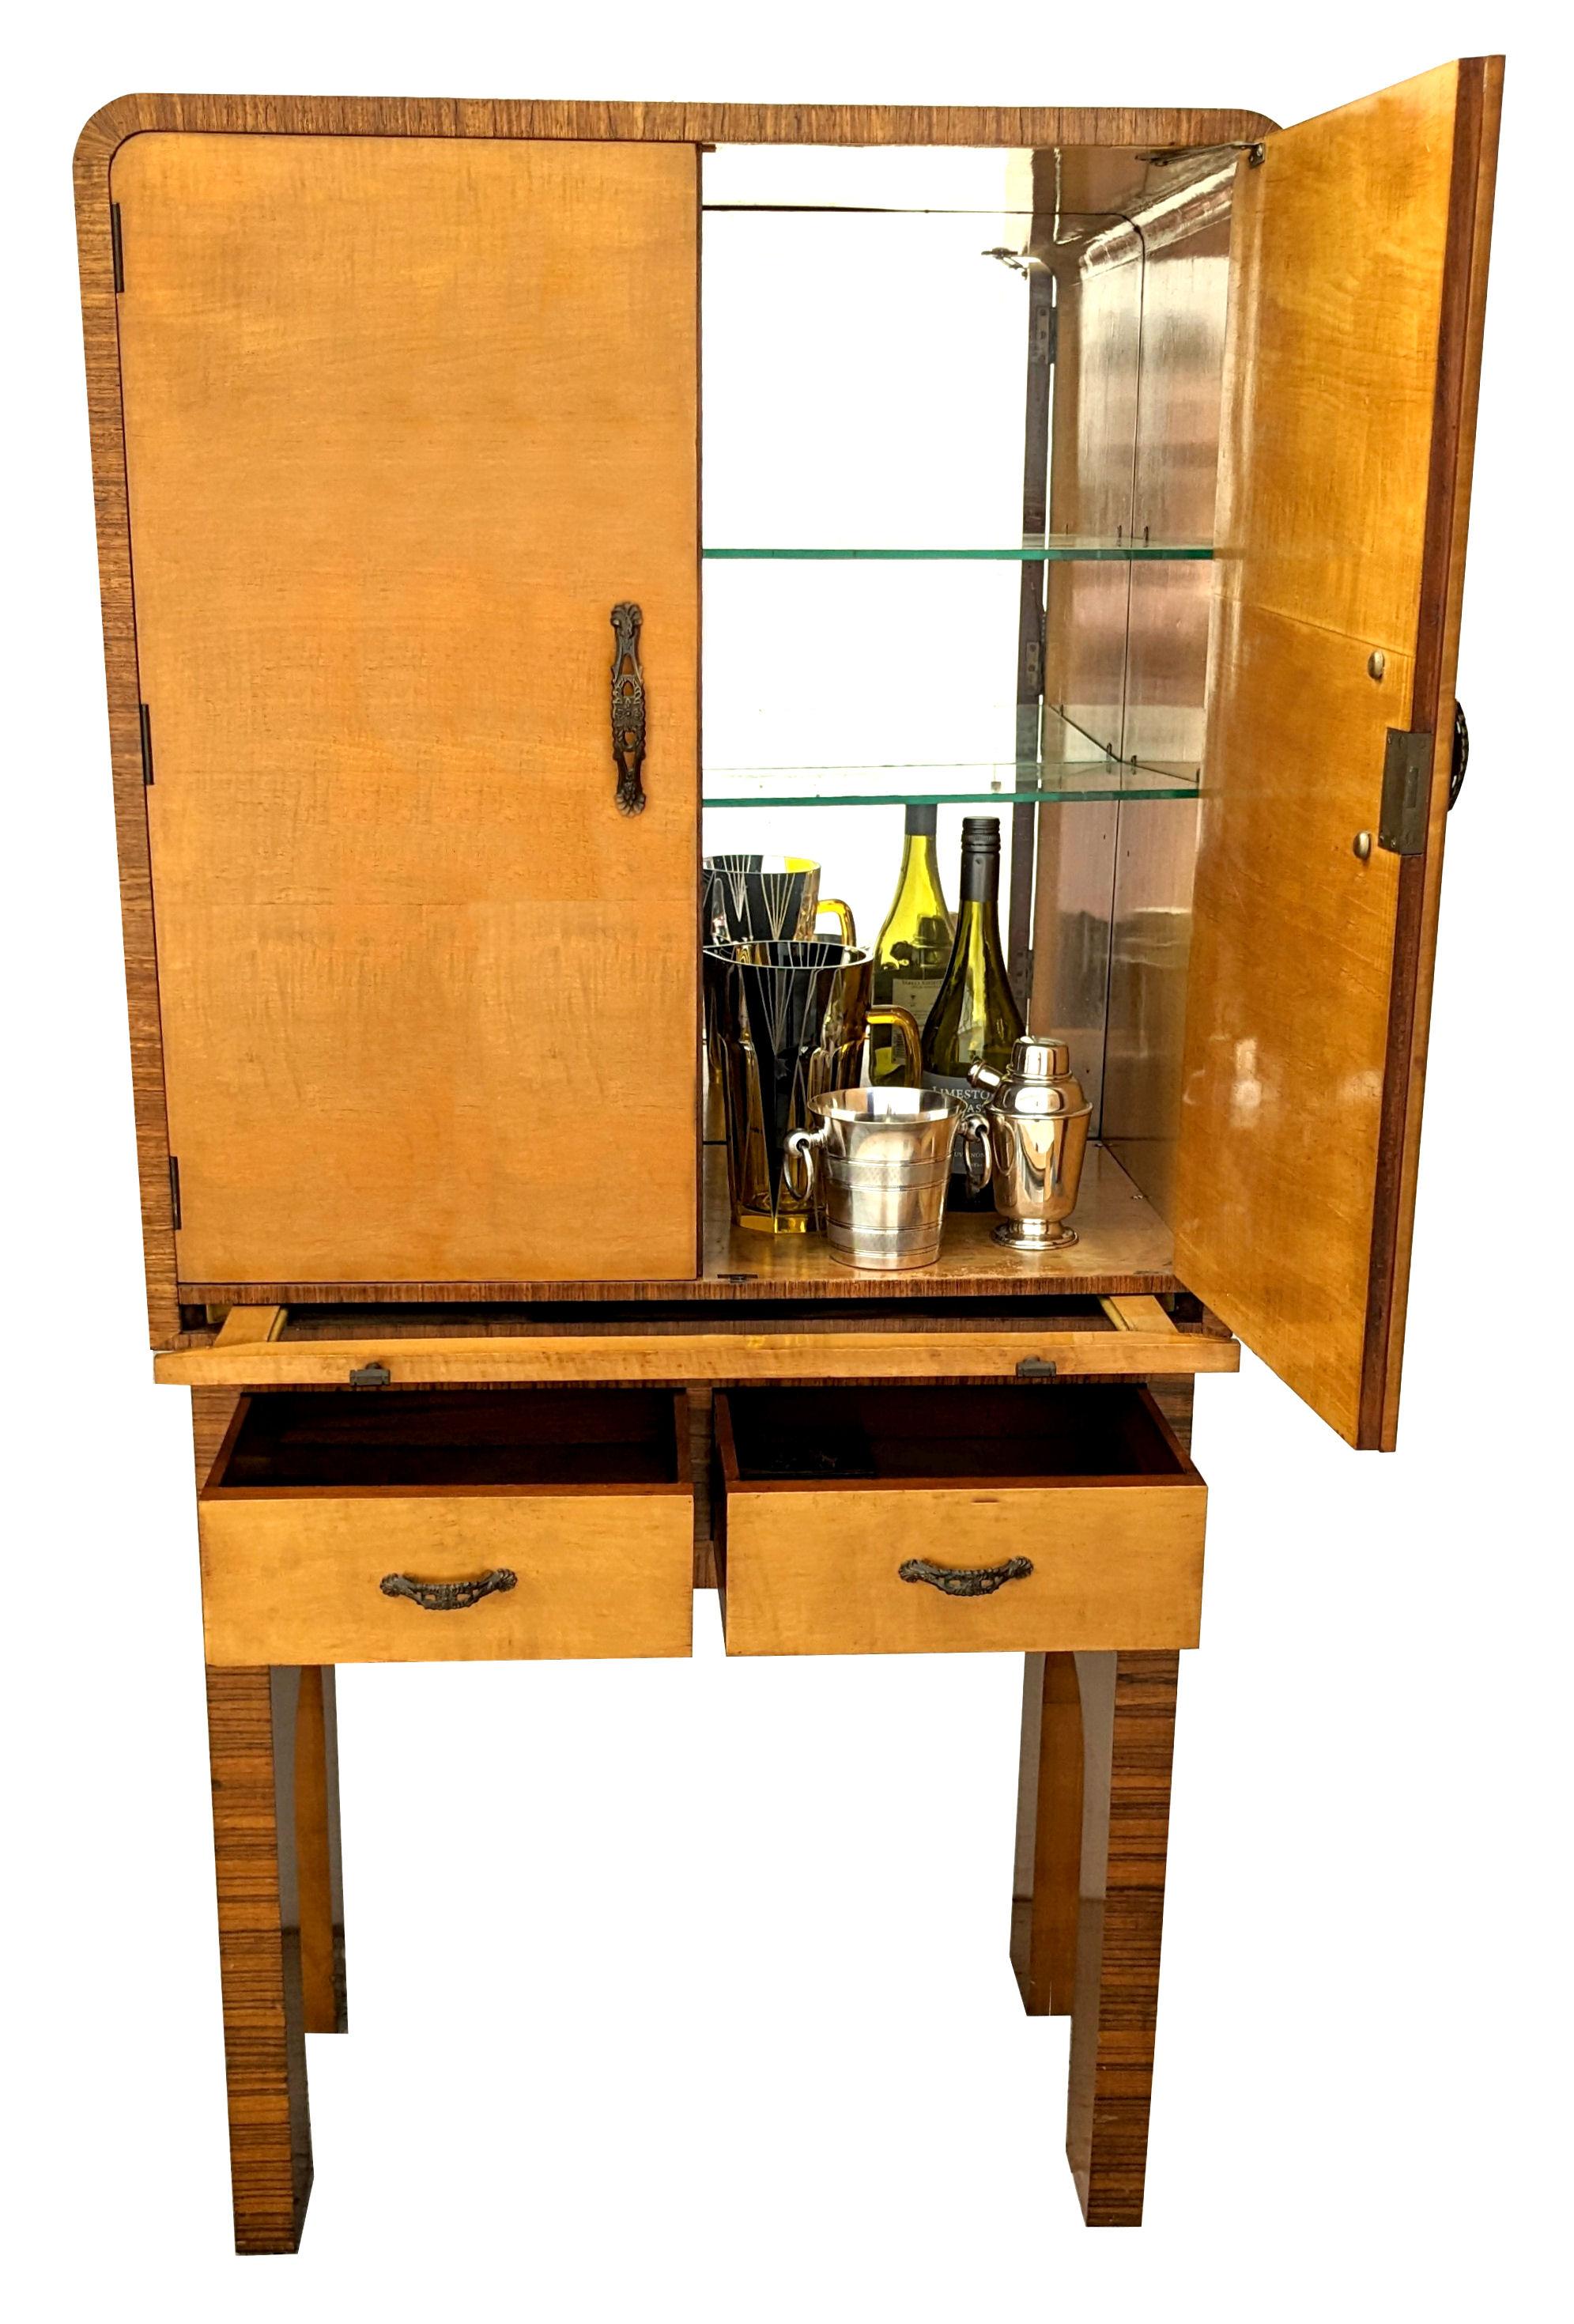 Art Deco Satinwood High End Cocktail Cabinet By Epstein Brothers, c1930 In Good Condition For Sale In Devon, England